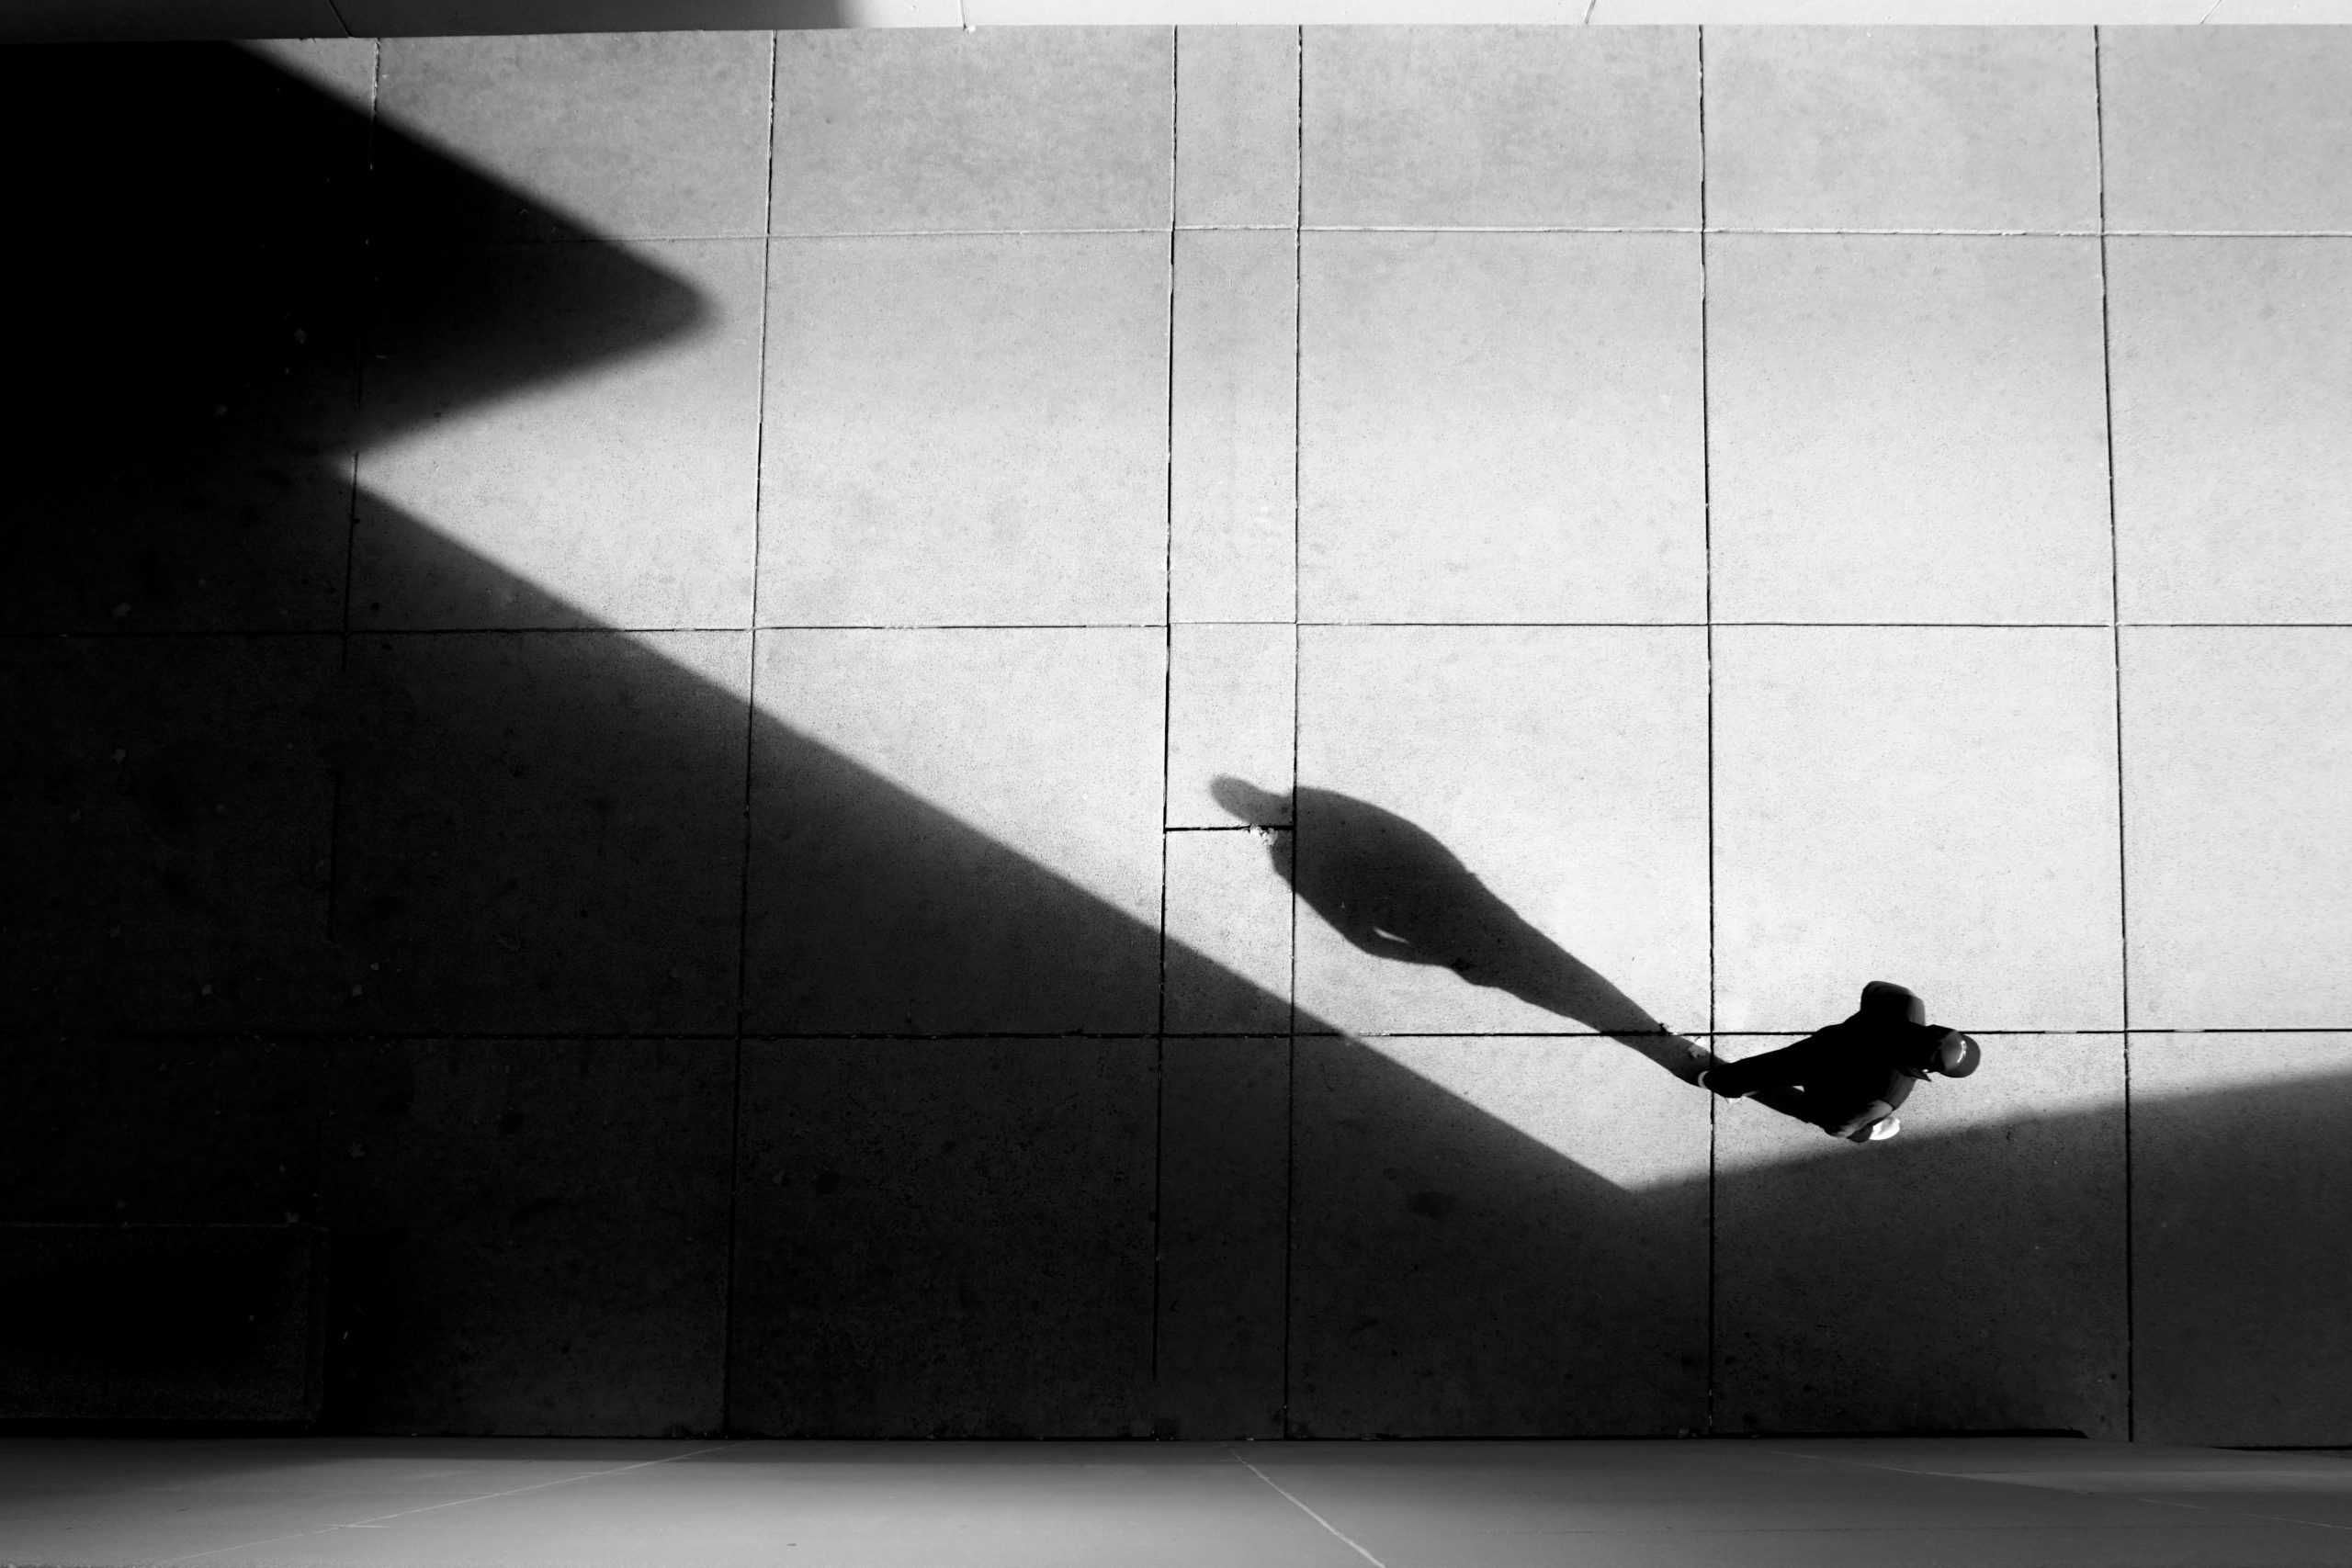 Silhouette aerial photography shot of a person standing next to a shadow of a building